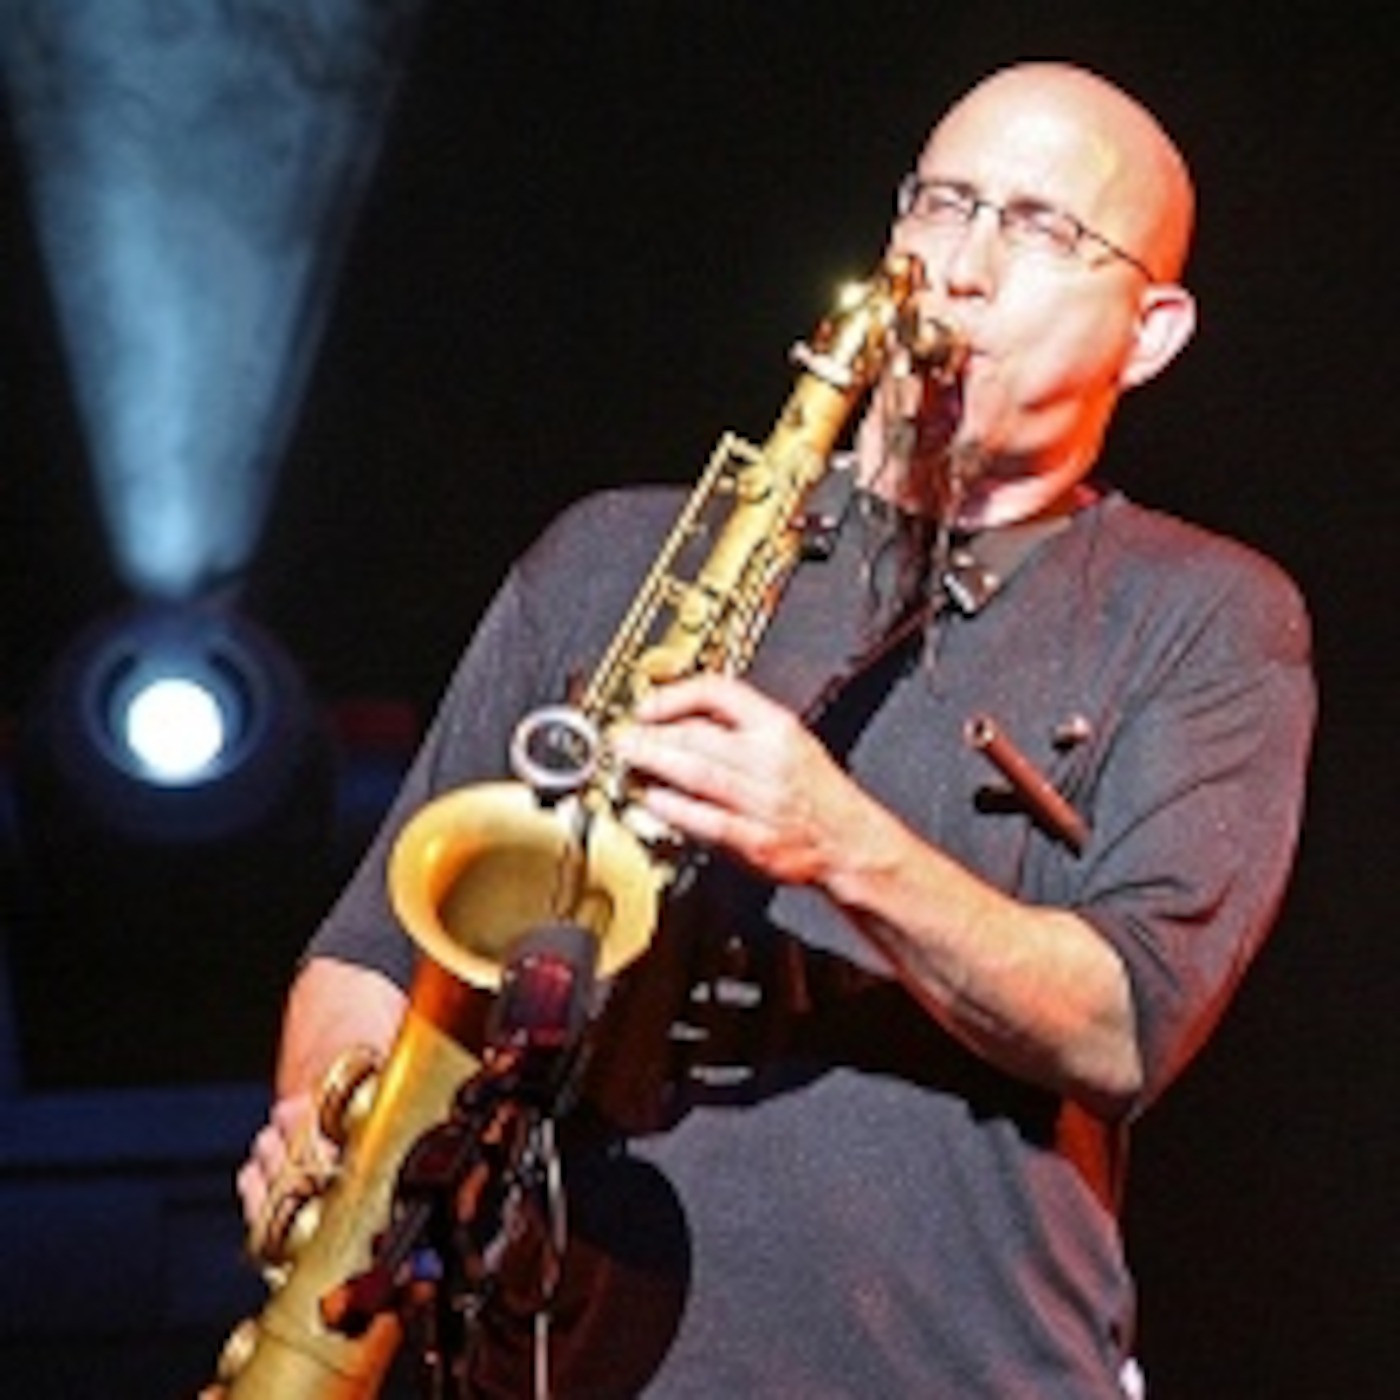 The Jeff Coffin Interview